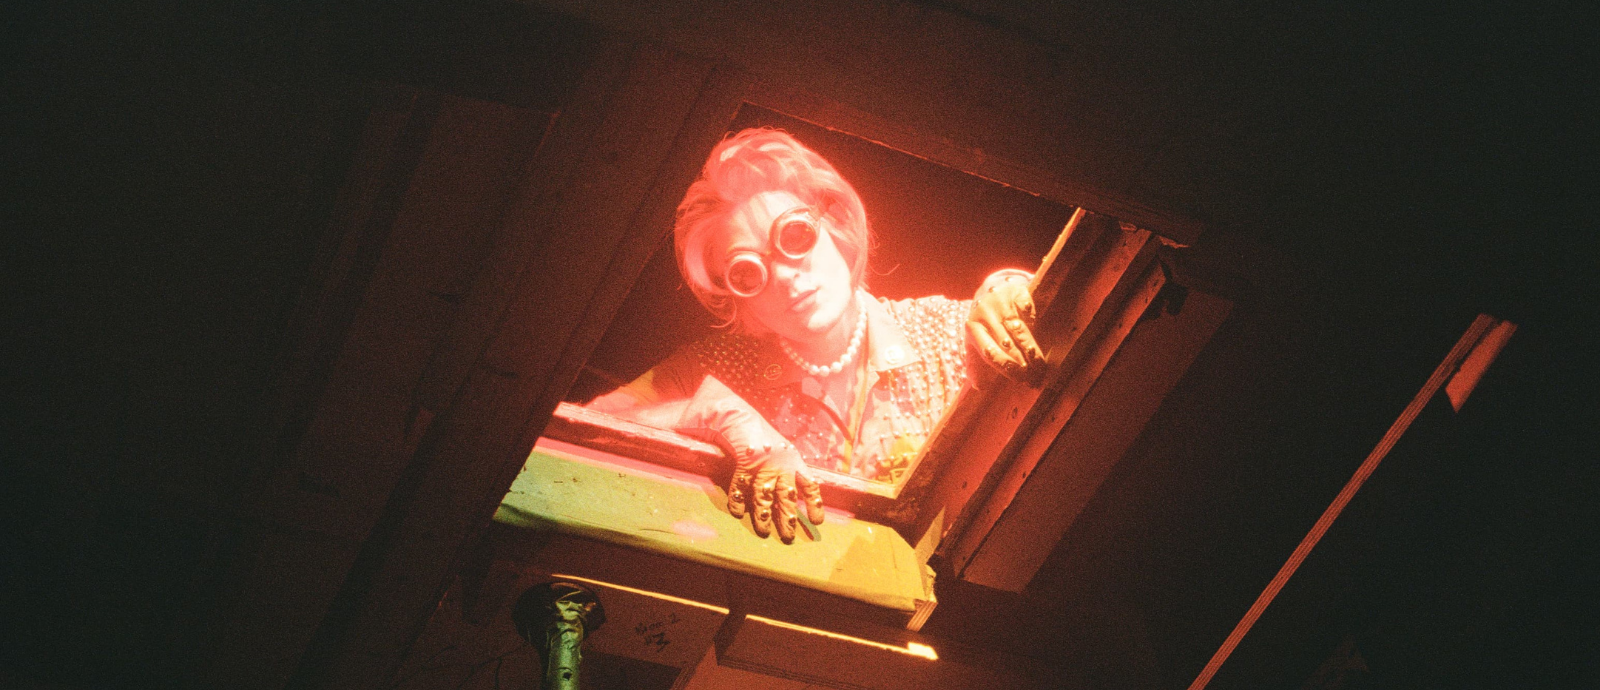 Pearle looks down at the camera through a trapdoor. She is wearing stoned leather gloves, a pearl necklace, and goggles.